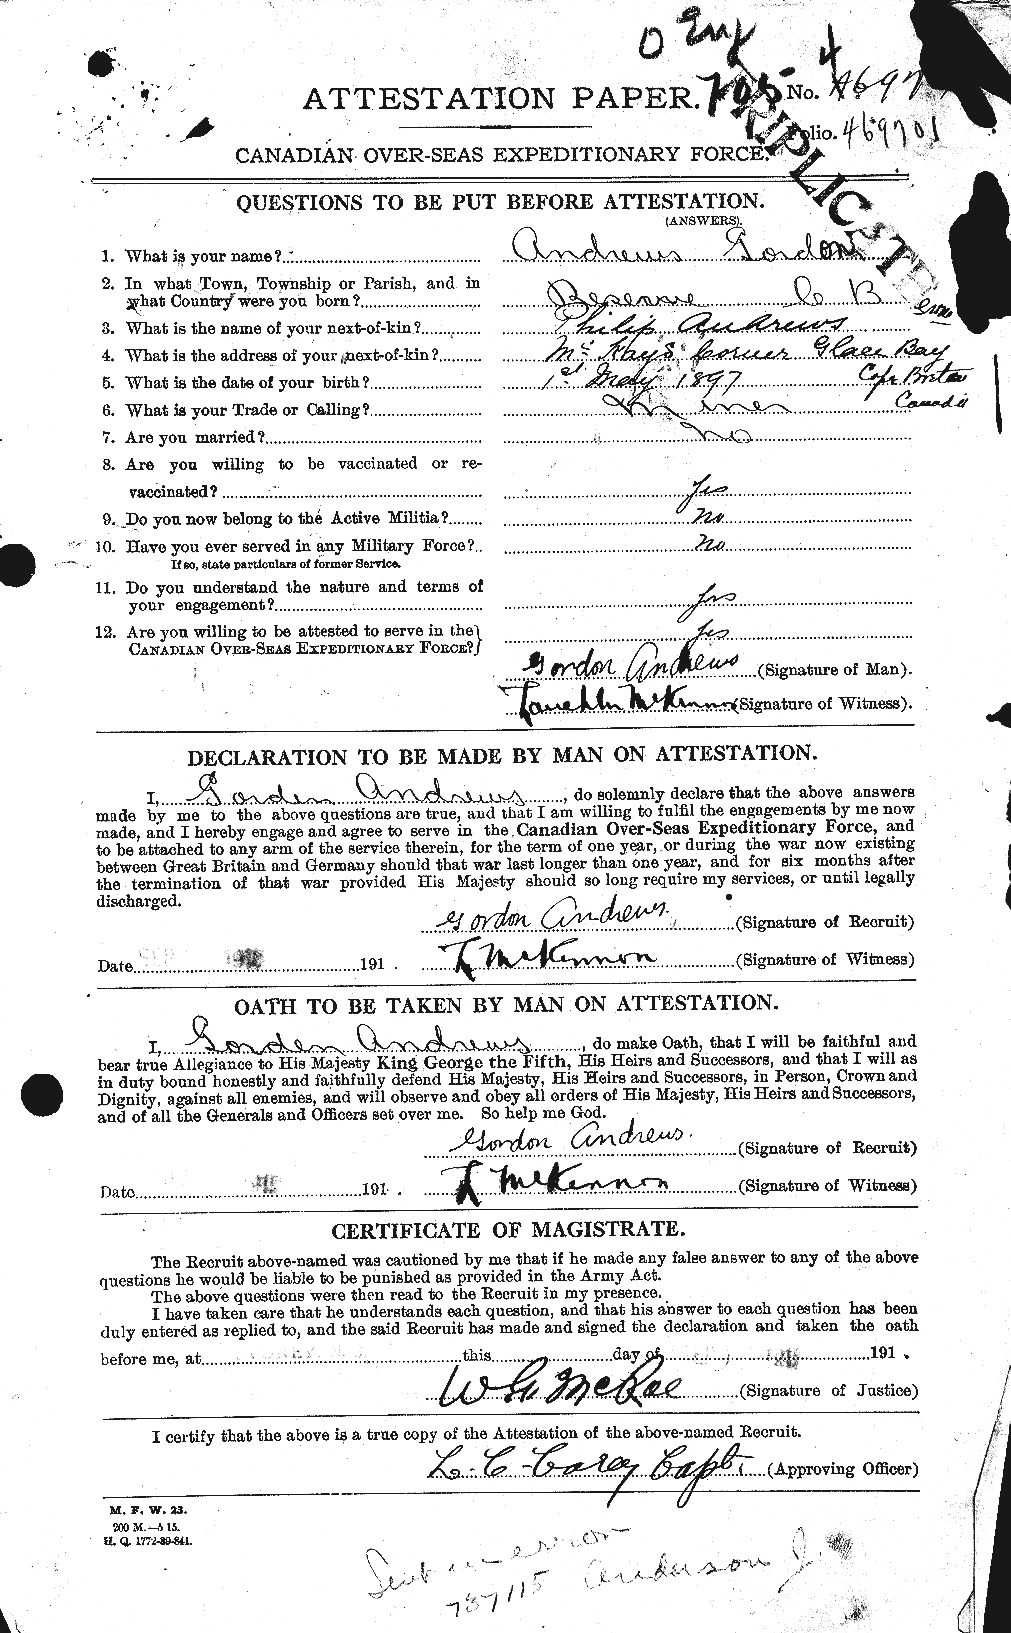 Personnel Records of the First World War - CEF 210303a